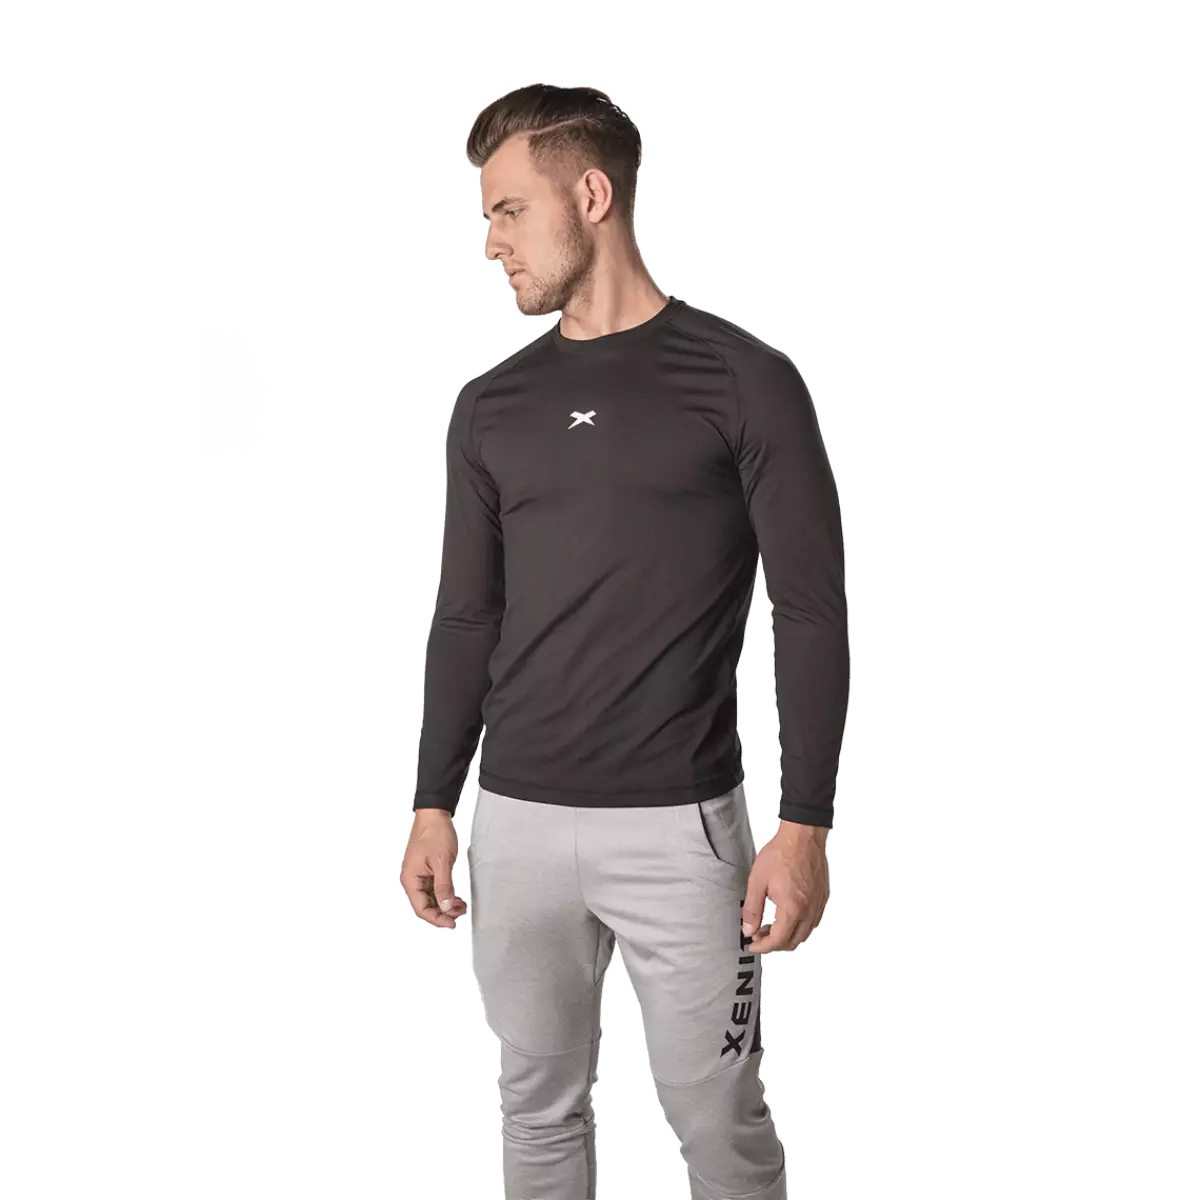 Male model wearing black long sleeve shirt with white Xenith-X logo on sternum, from front.